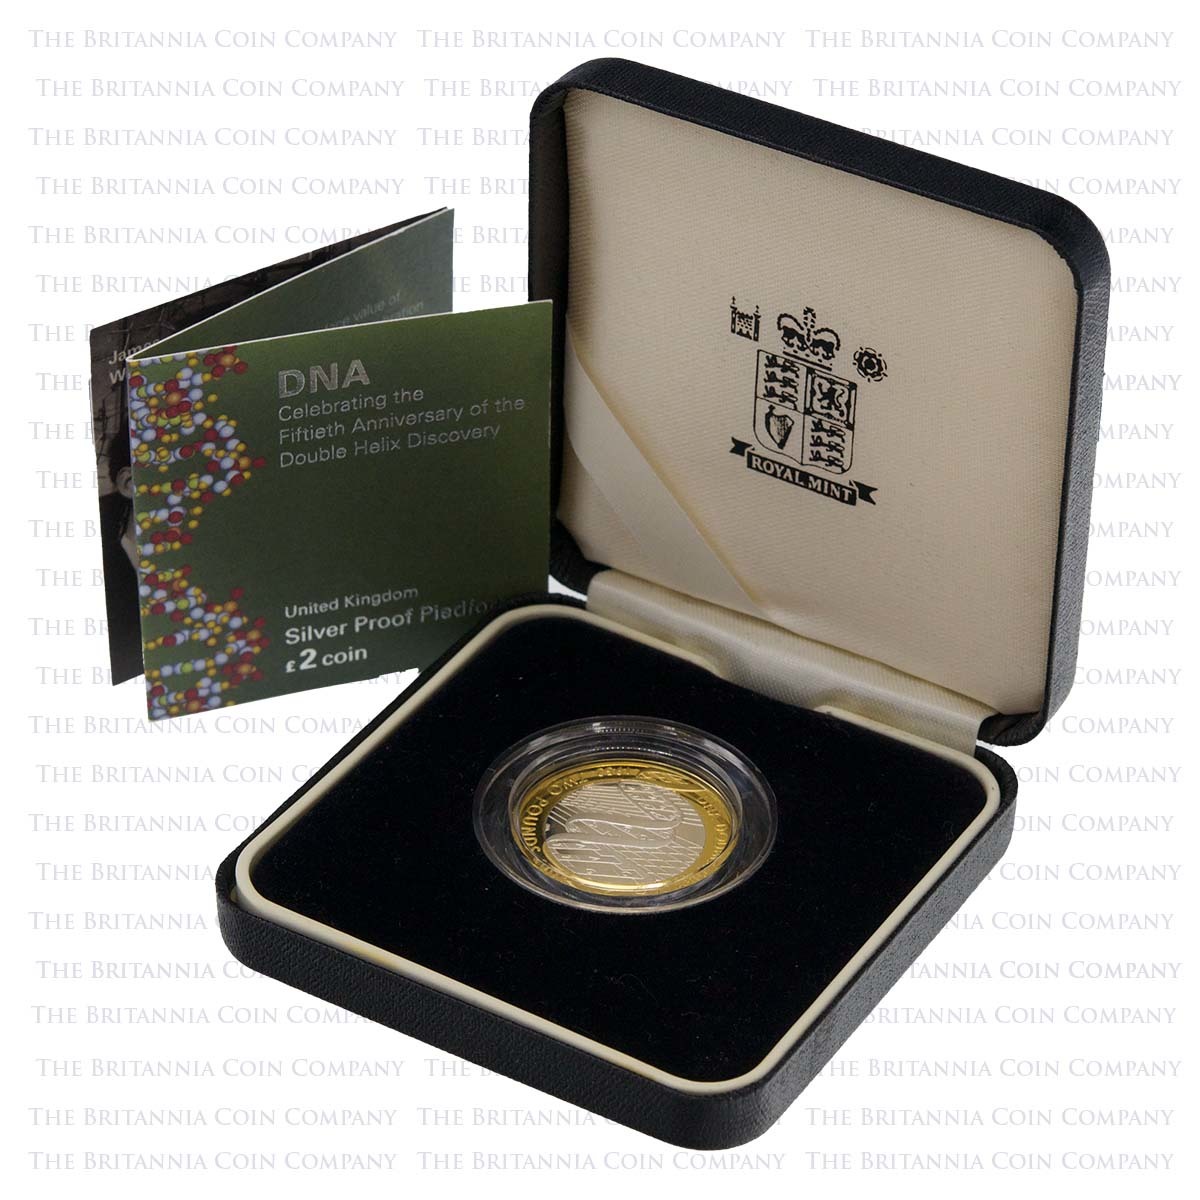 2003 DNA Double Helix 50th Anniversary £2 Piedfort Silver Proof Boxed